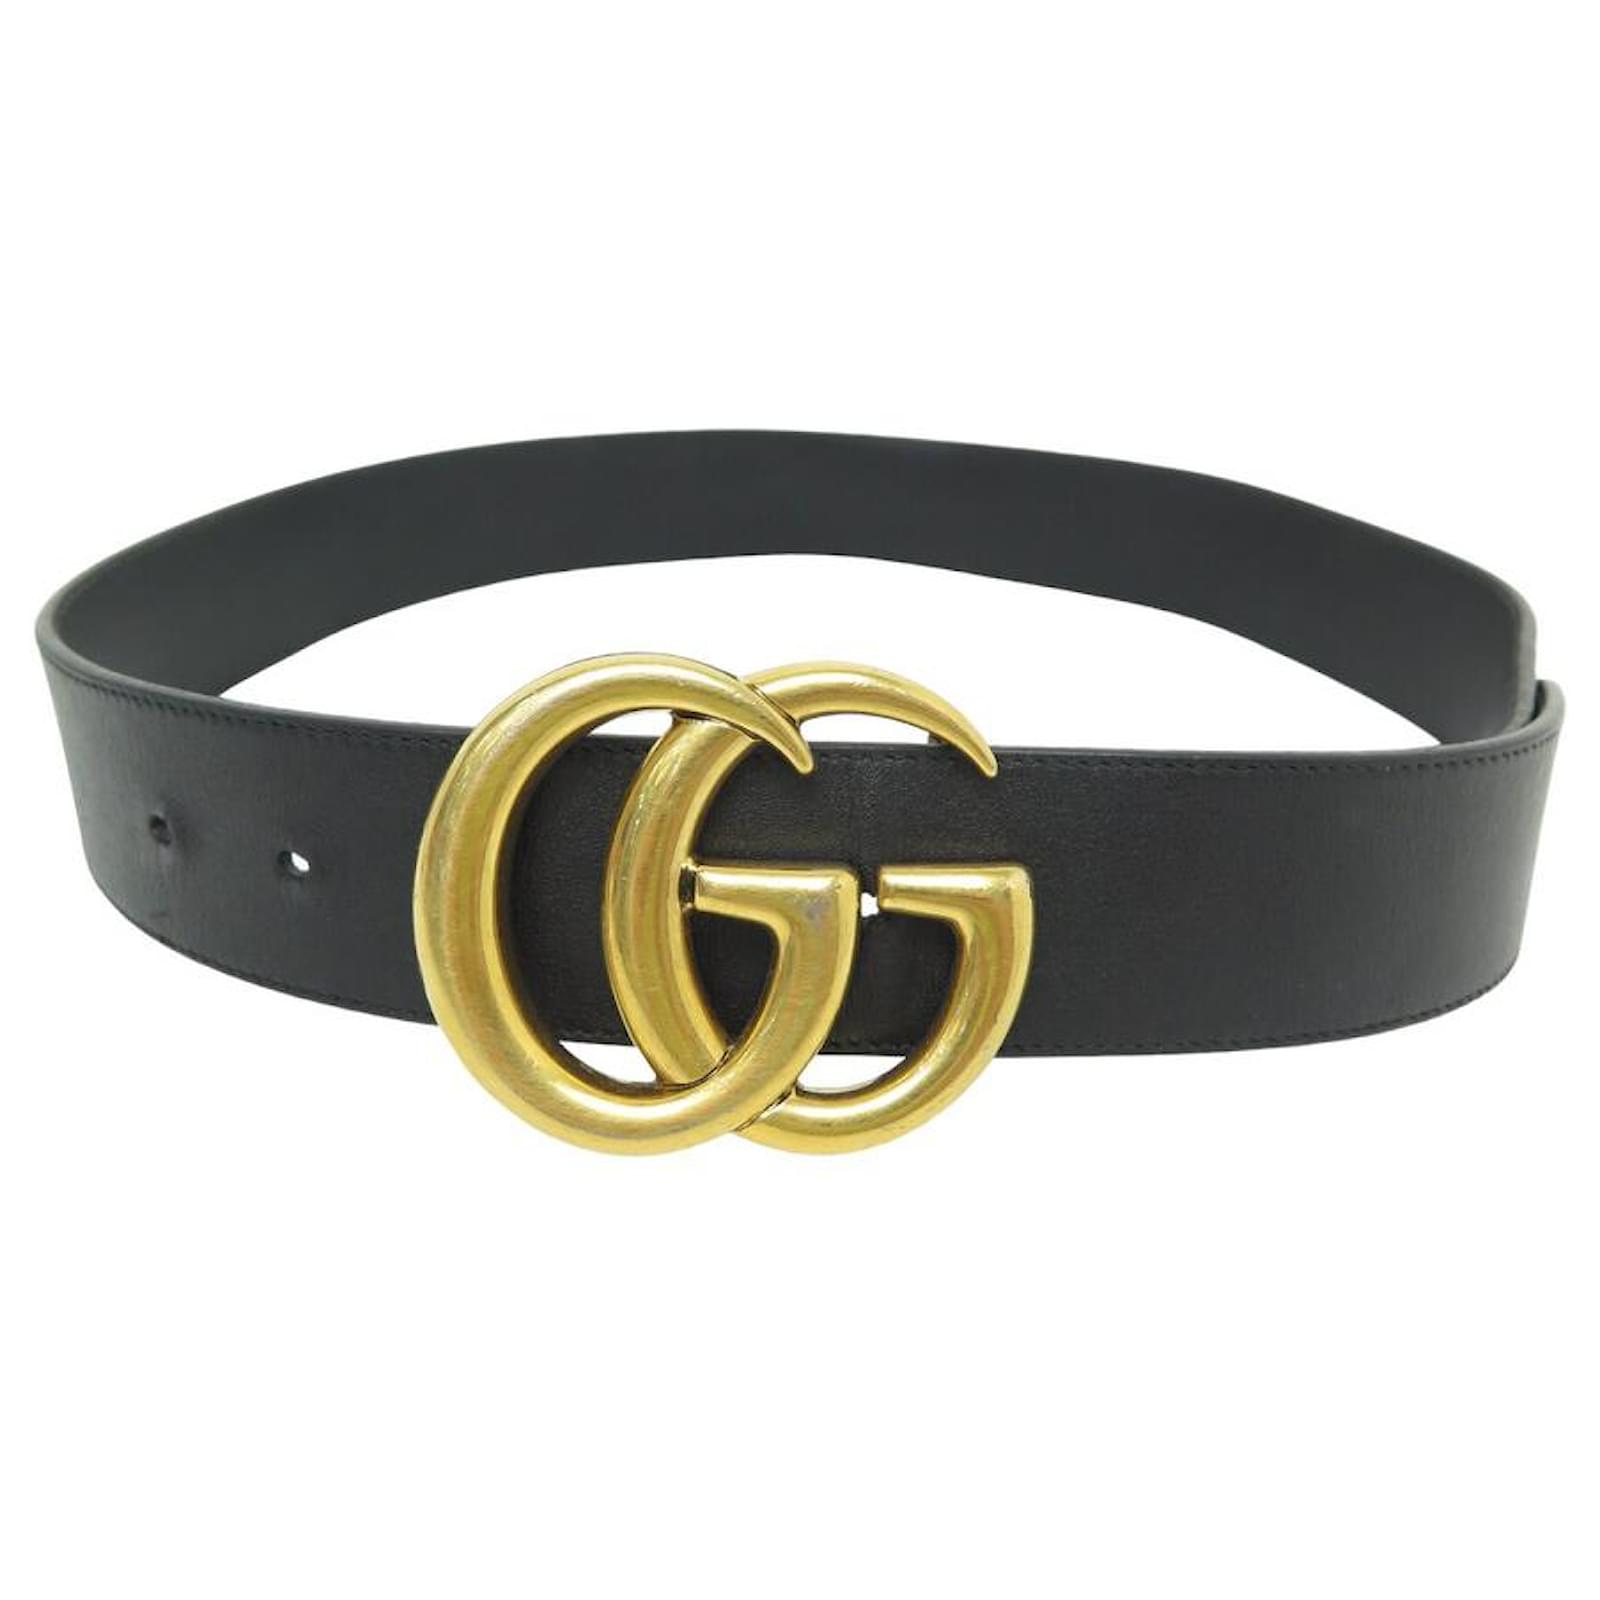 GG Leather Belt in Black - Gucci